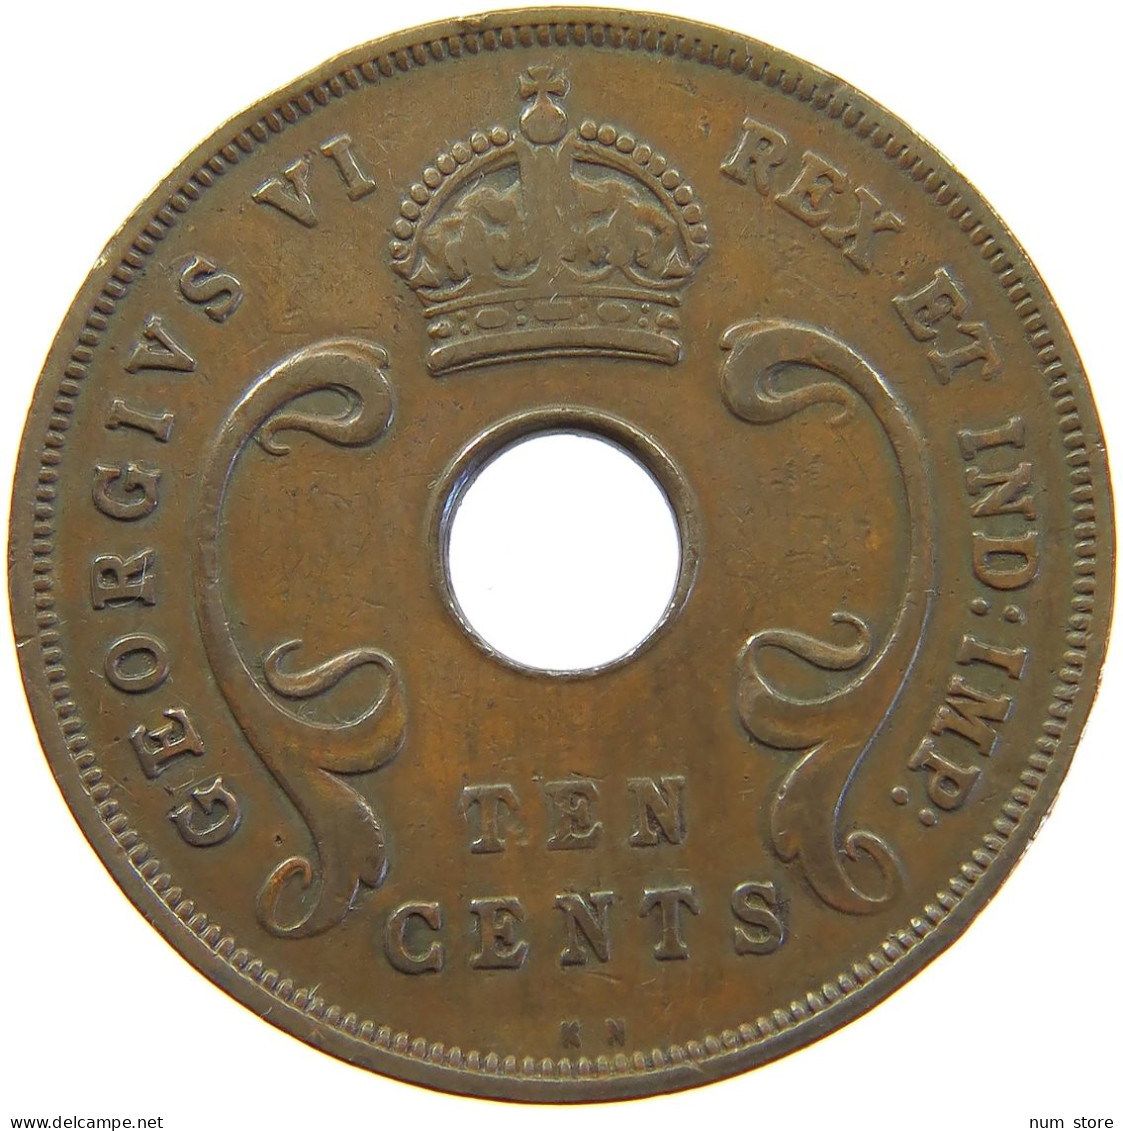 EAST AFRICA 10 CENTS 1939 GEORGE VI. (1936-1952) #MA 065515 - British Colony